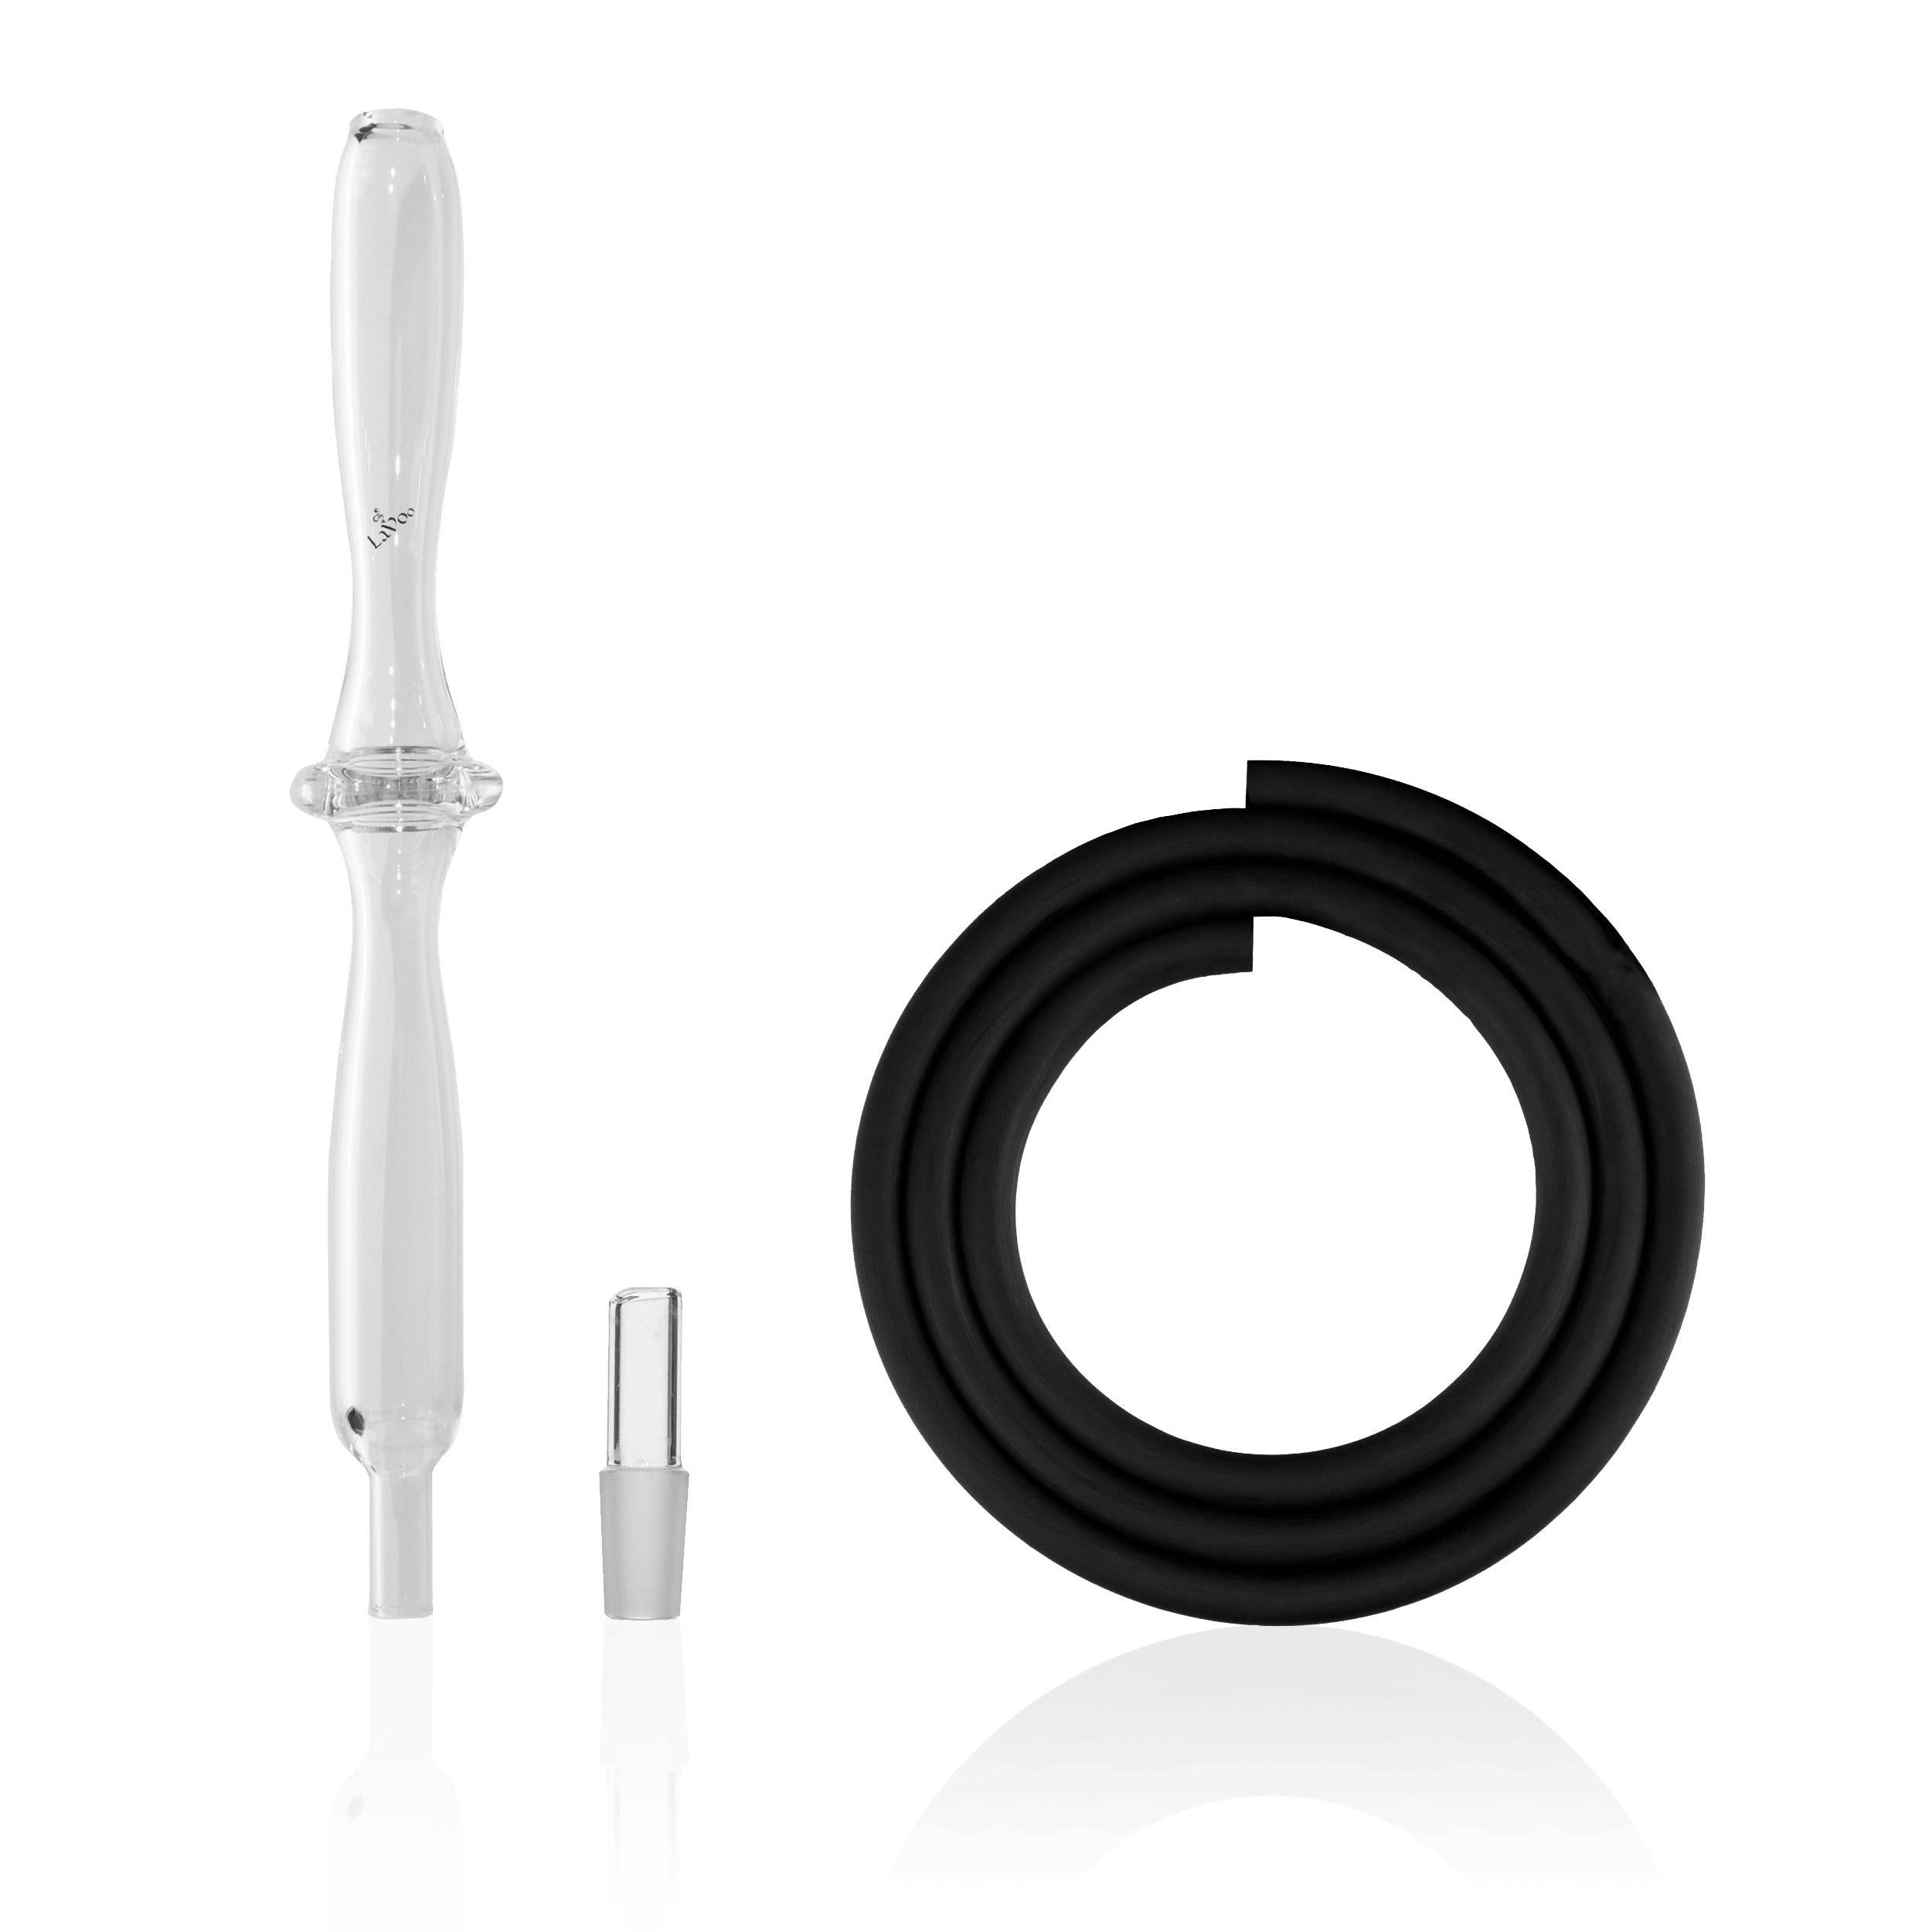 Lavoo Soft-Touch Silicone Hose with Glass Tips - Lavoo